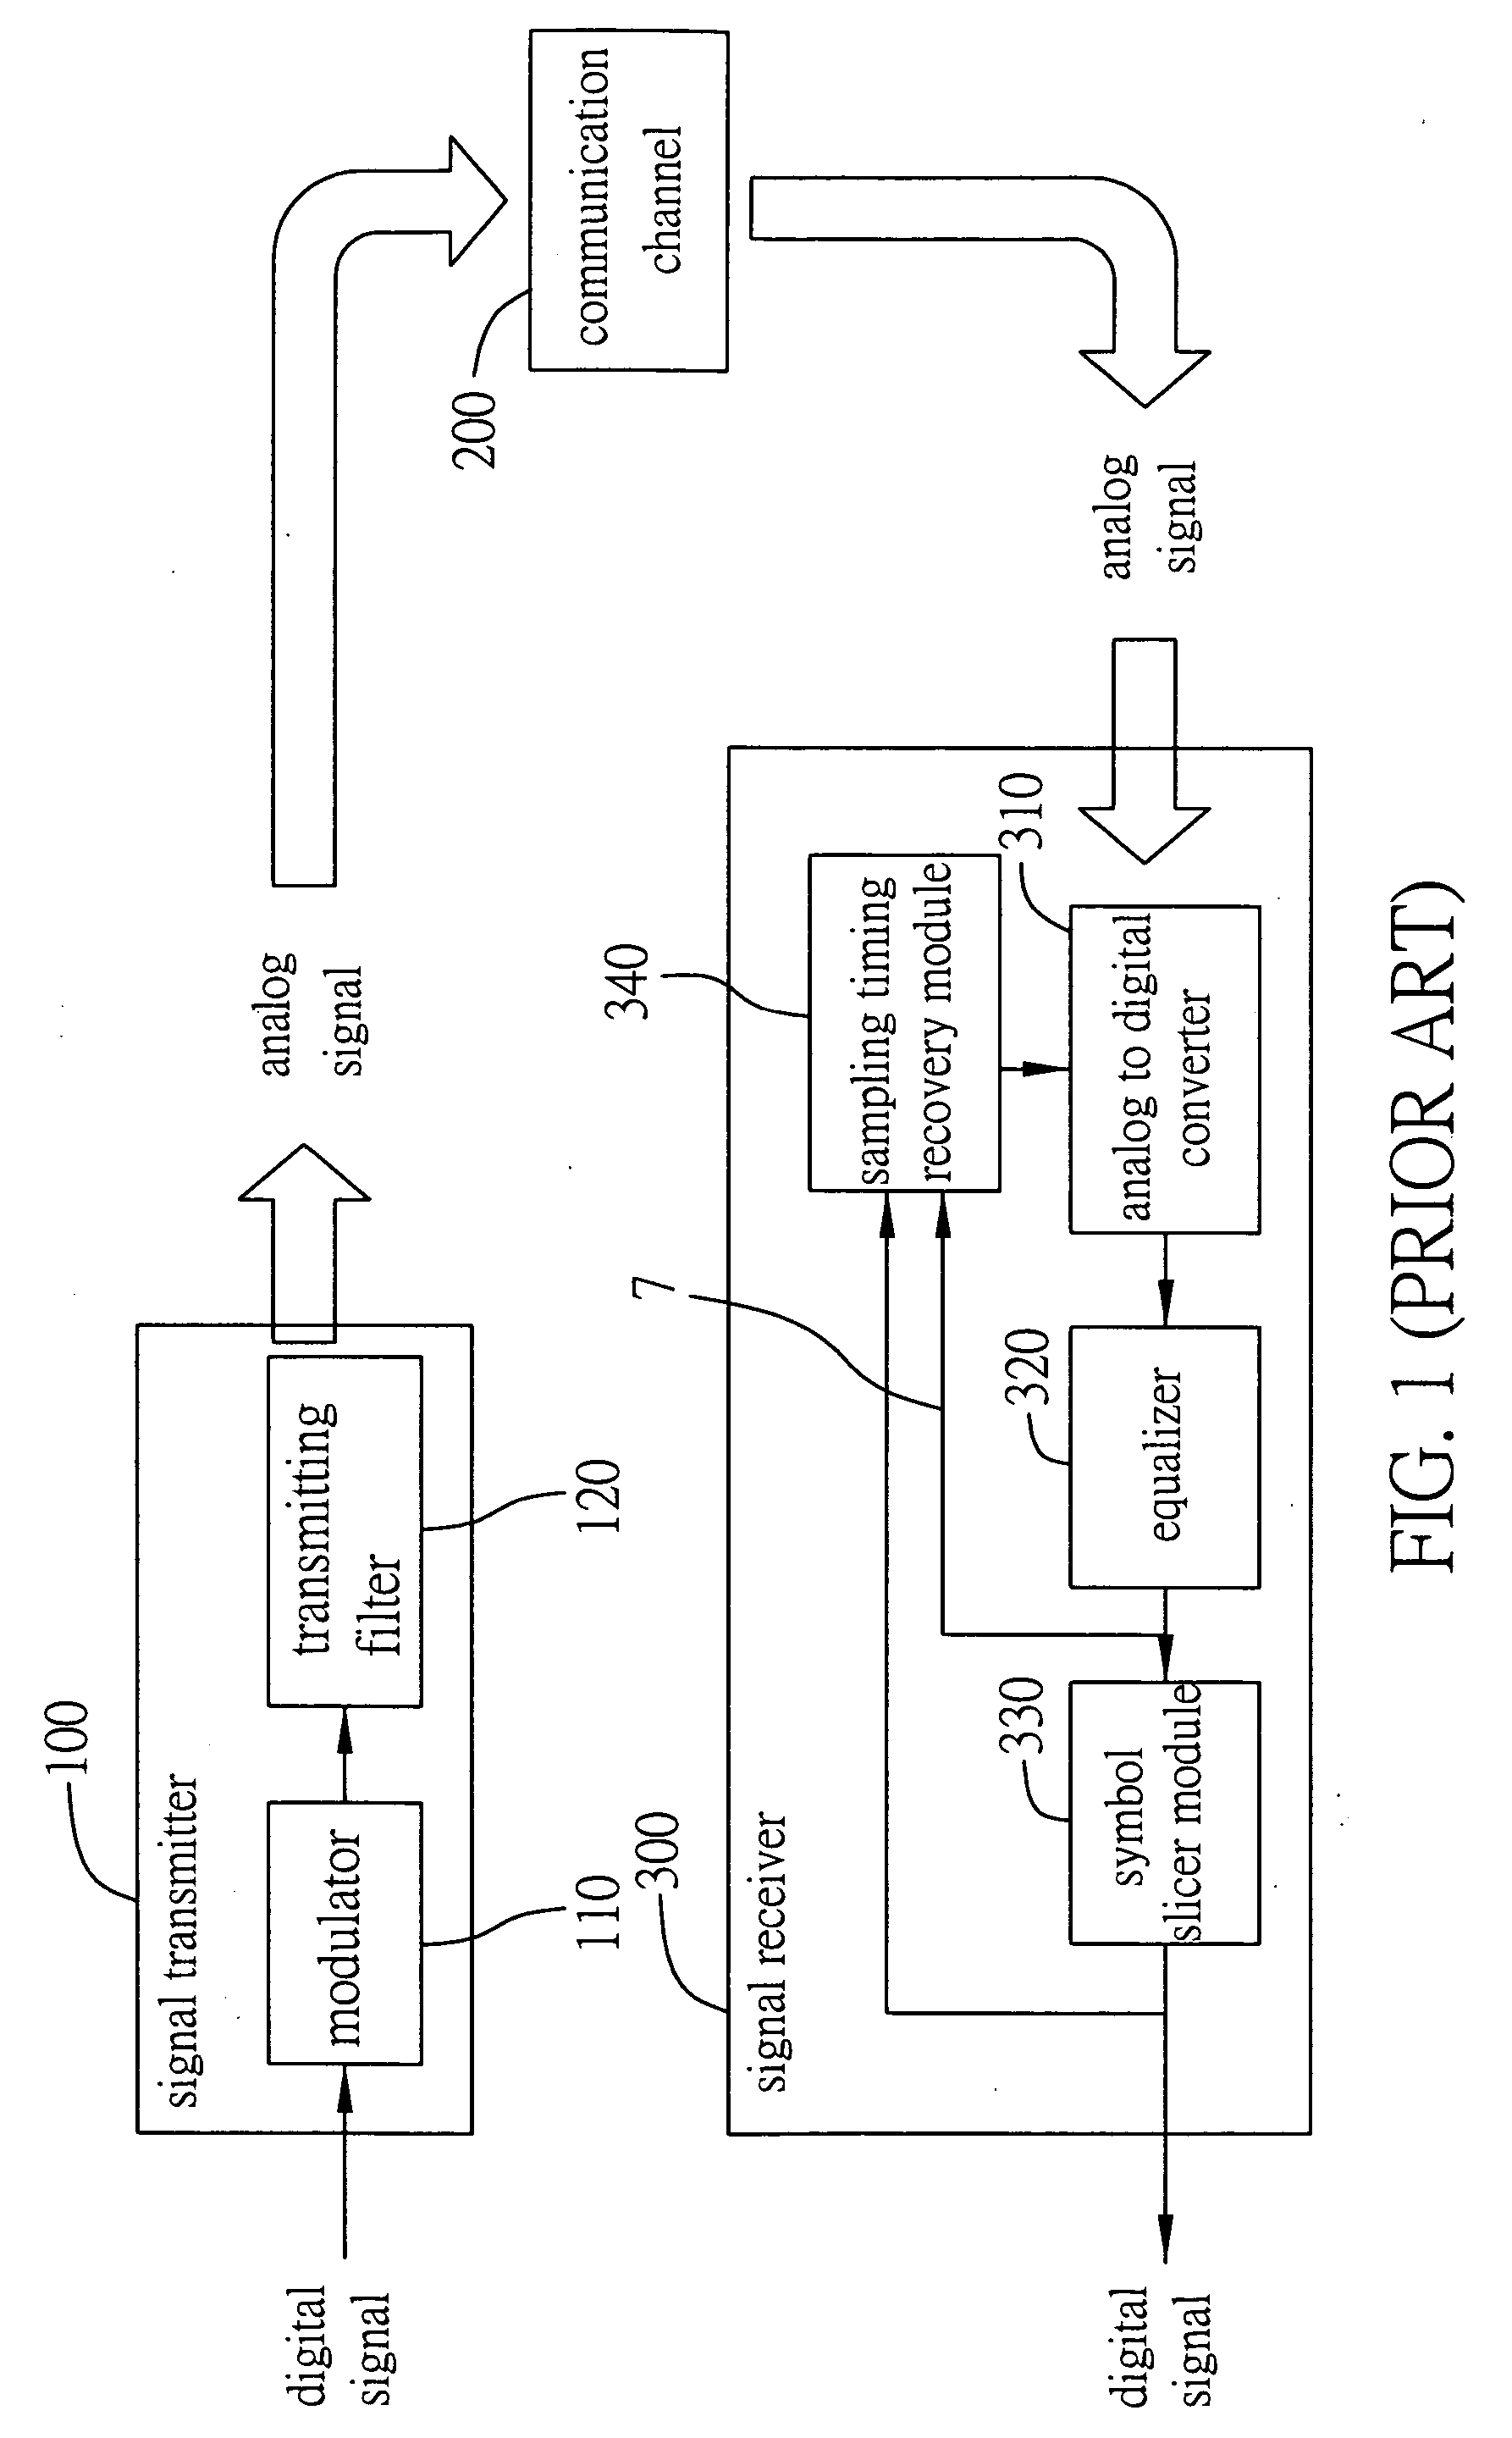 Timing recovery method and device for combining pre-filtering and feed-forward equalizing functions